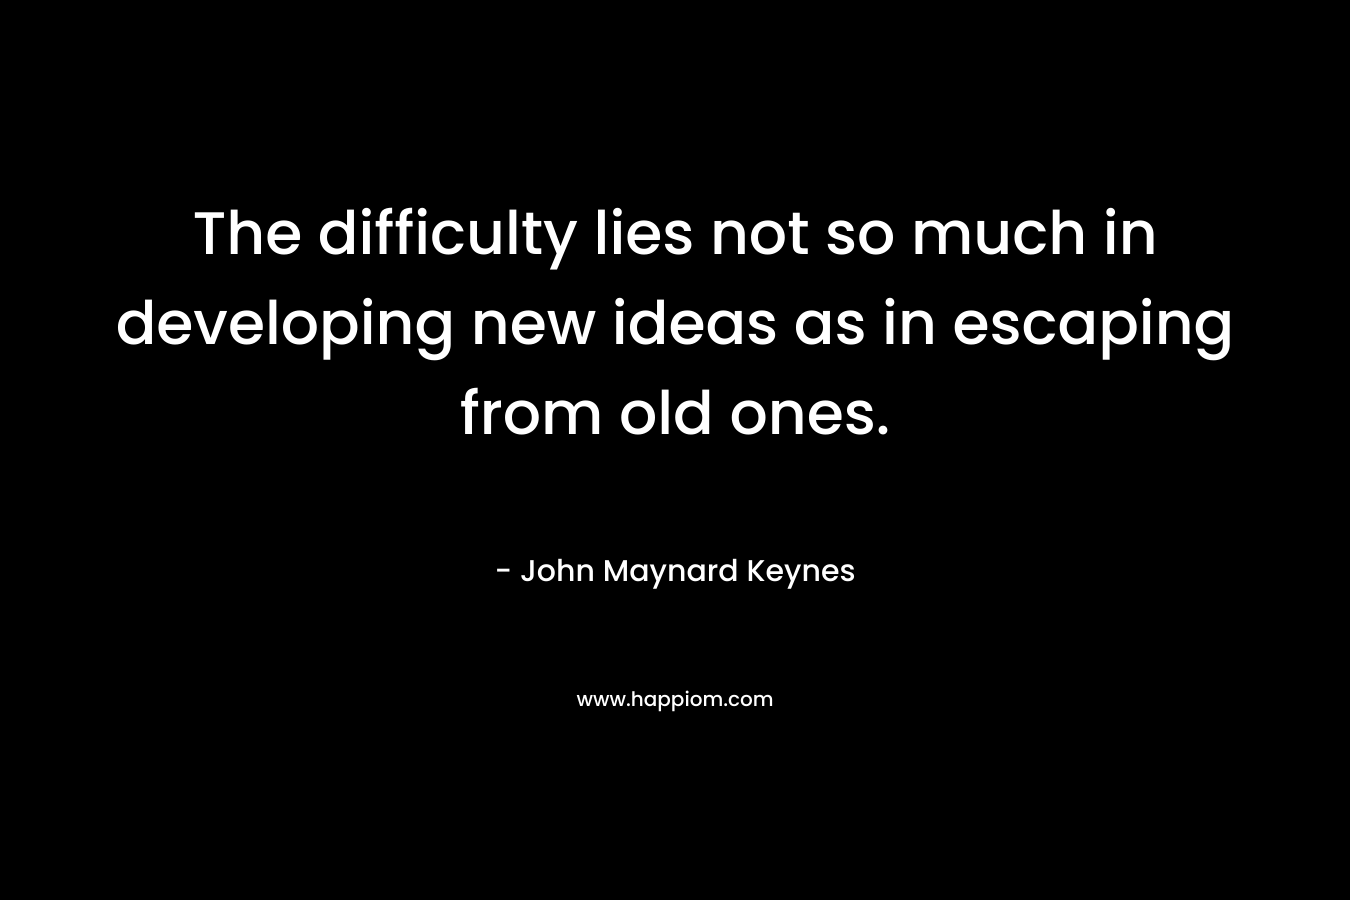 The difficulty lies not so much in developing new ideas as in escaping from old ones. – John Maynard Keynes